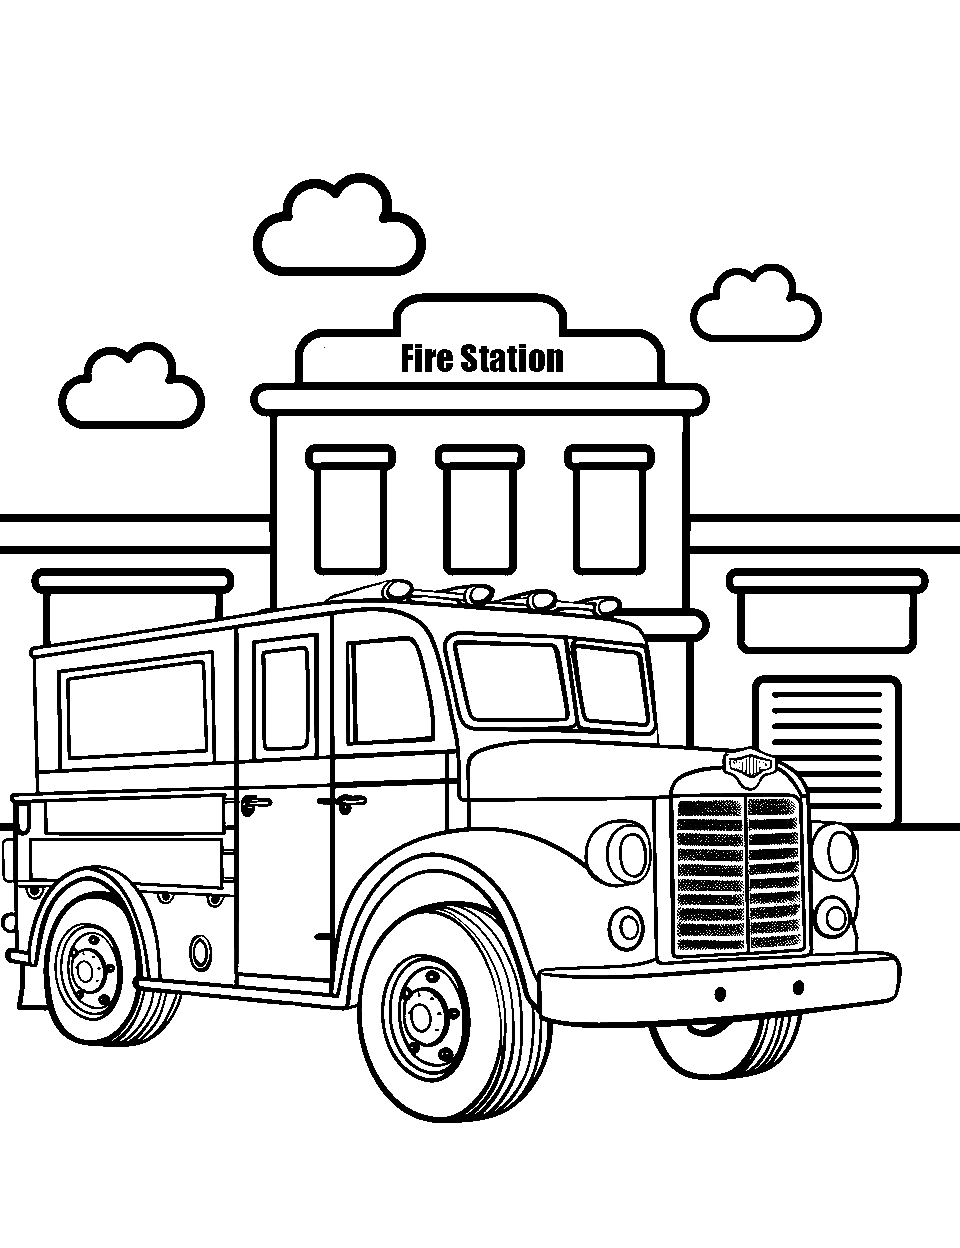 Vintage Fire Engine Truck Coloring Page - An old-fashioned fire engine parked in front of a fire station.